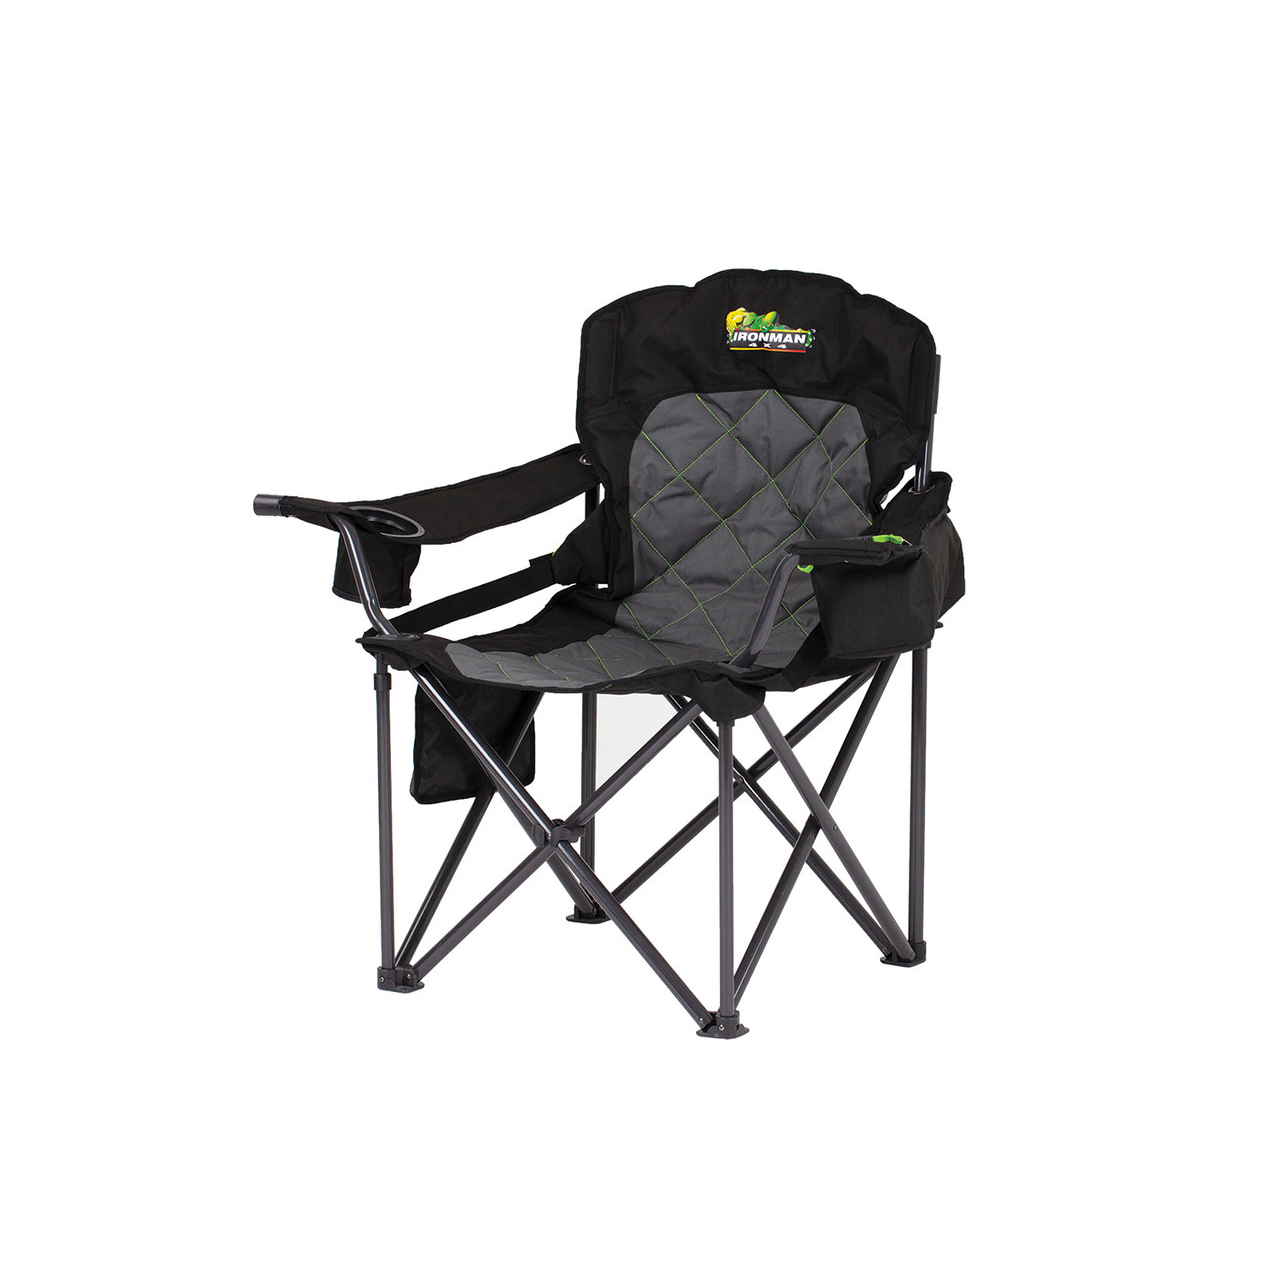 KING QUAD CAMP CHAIR WITH LUMBAR SUPPORT (250KG)